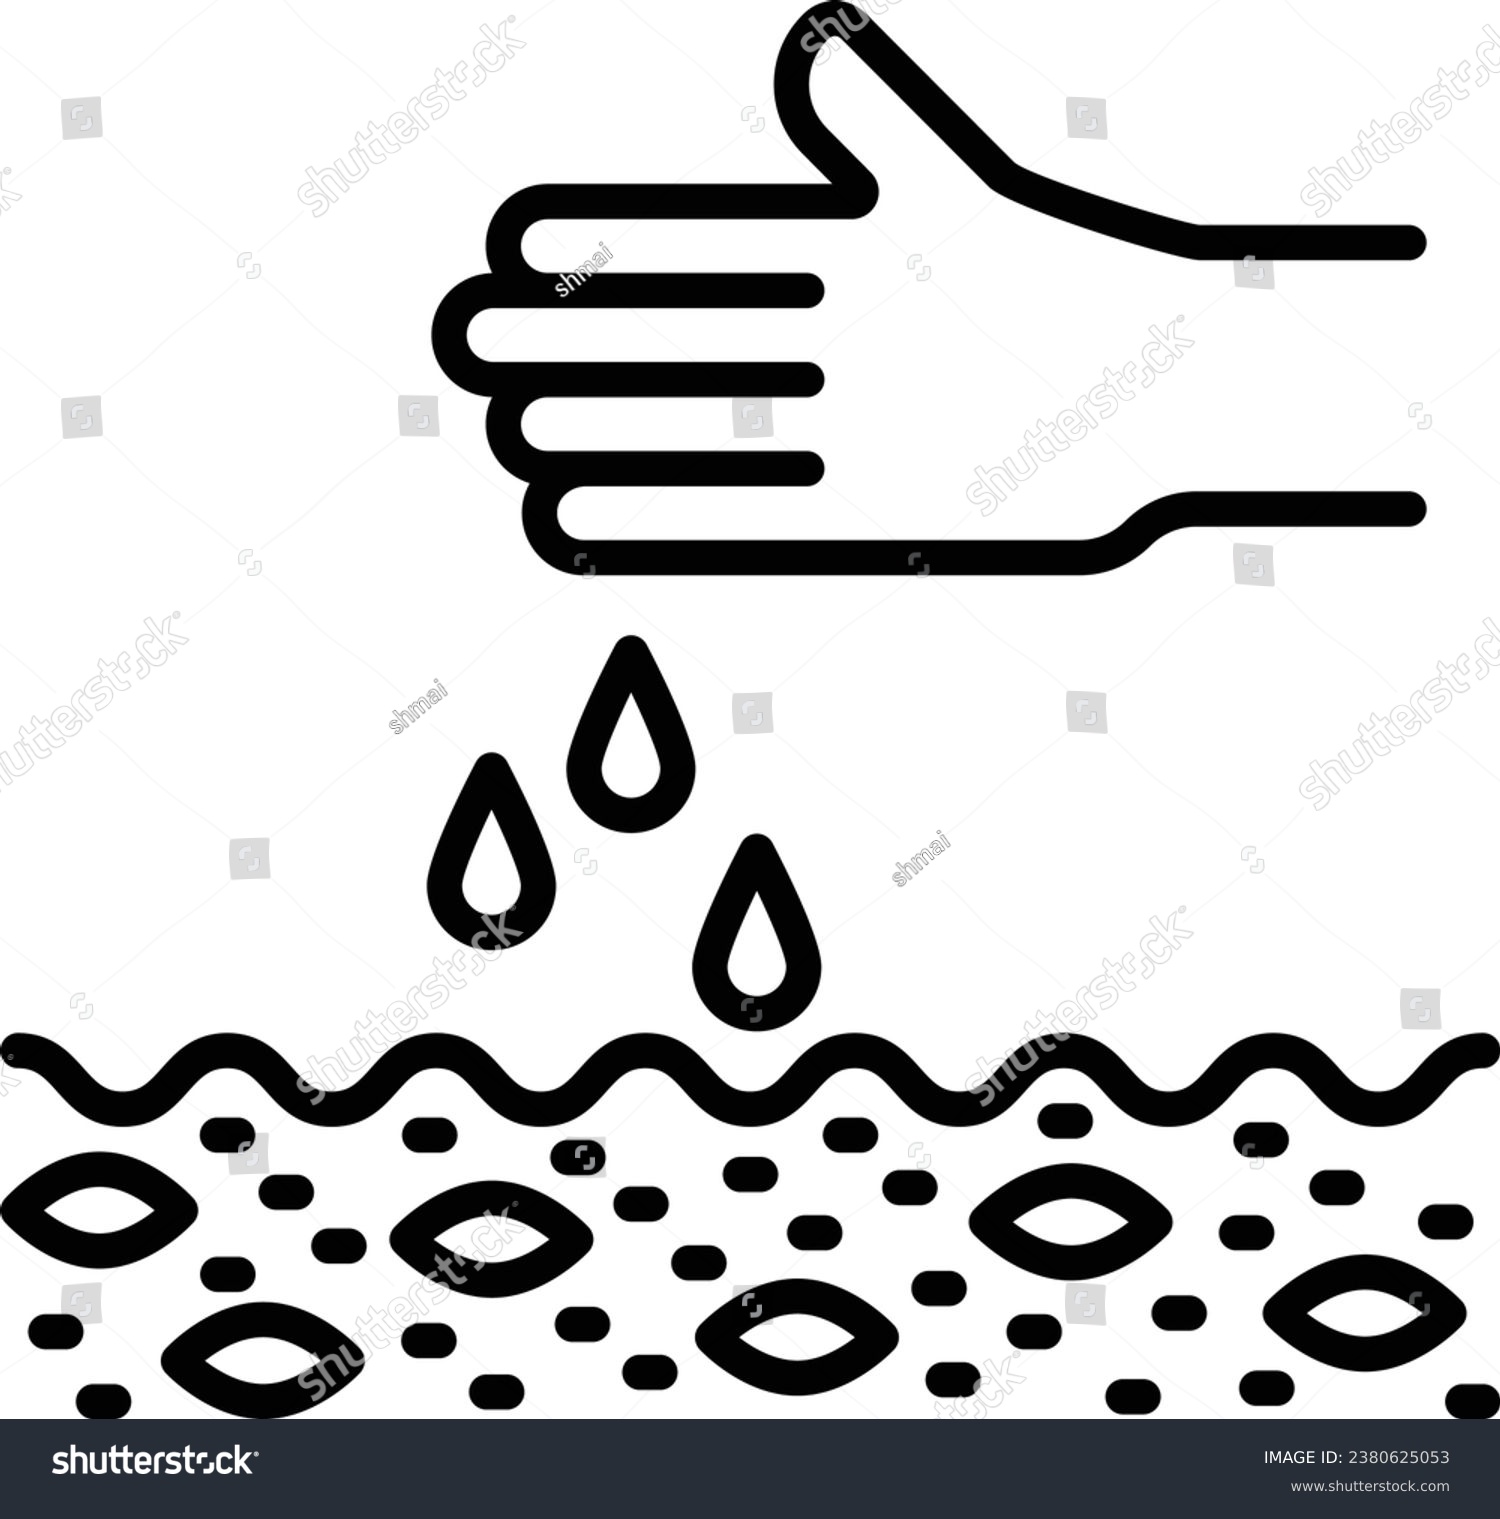 SVG of Spreading the Grass Seed vector outline icon design, Lawn and Gardening symbol, Farm and Plant sign, agriculture and horticulture equipment stock illustration, Seeding by Hand concept svg